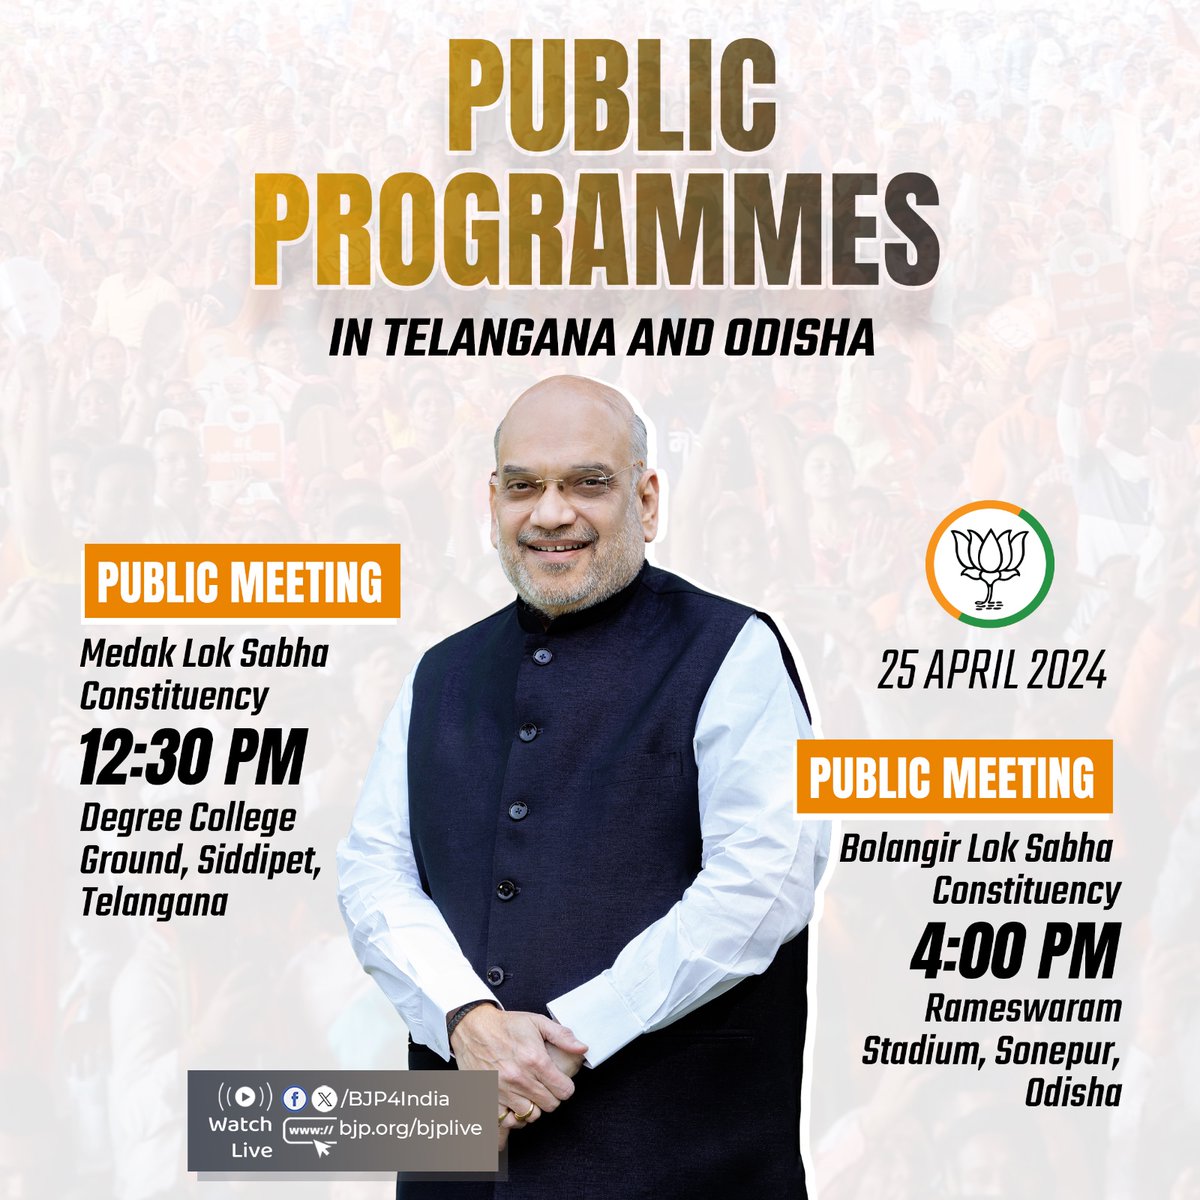 Union Home and Cooperation Minister Shri @AmitShah's public programmes in Telangana and Odisha on 25 April 2024. Watch live: 📺twitter.com/BJP4India 📺facebook.com/BJP4India 📺youtube.com/BJP4India 📺bjp.org/bjplive